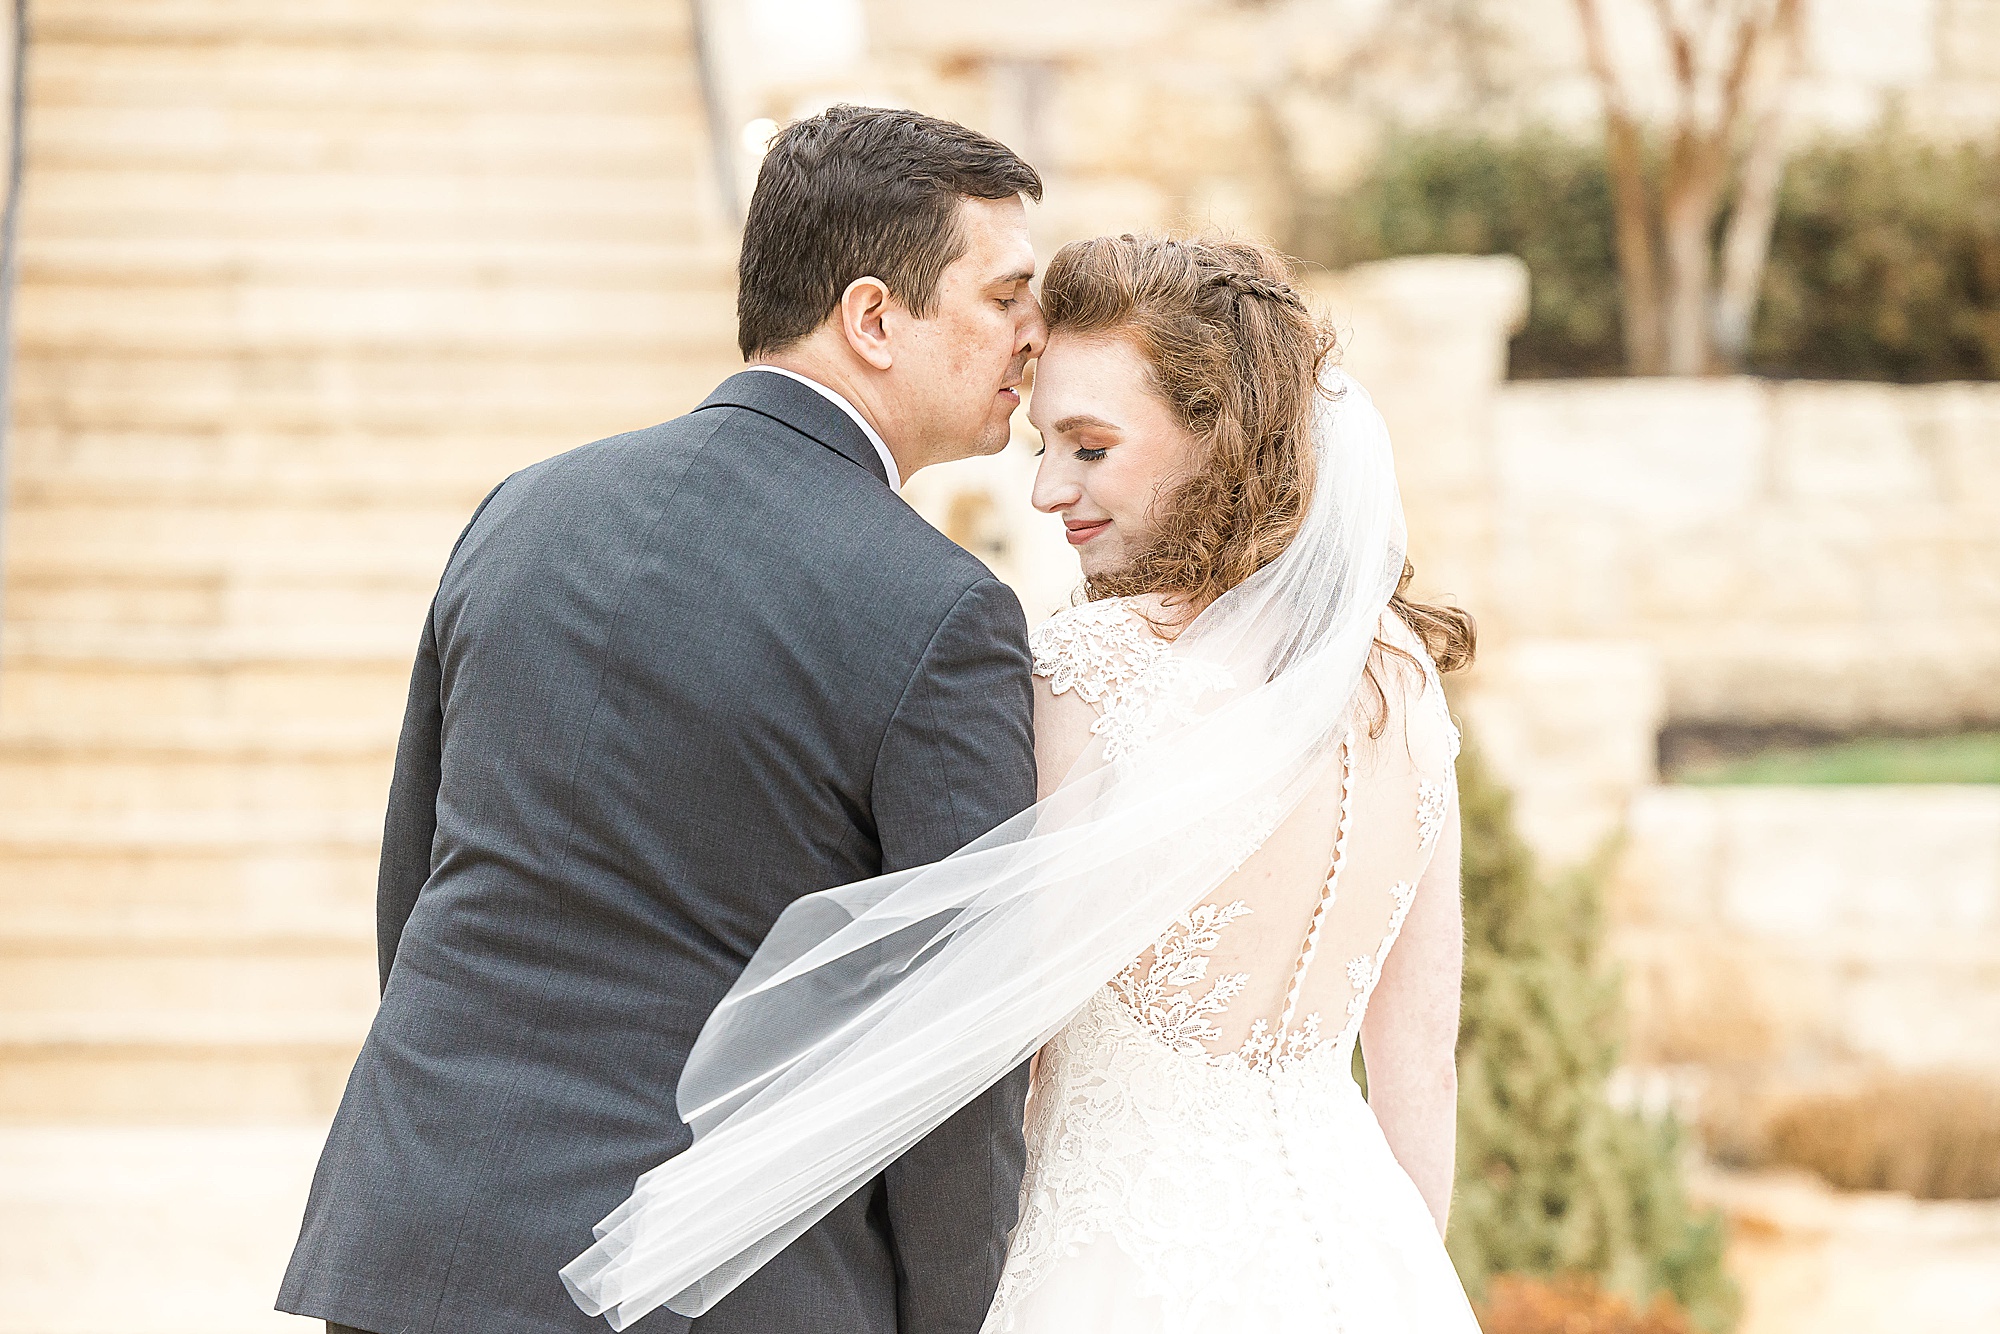 groom kisses bride's forehead while veil floats behind her